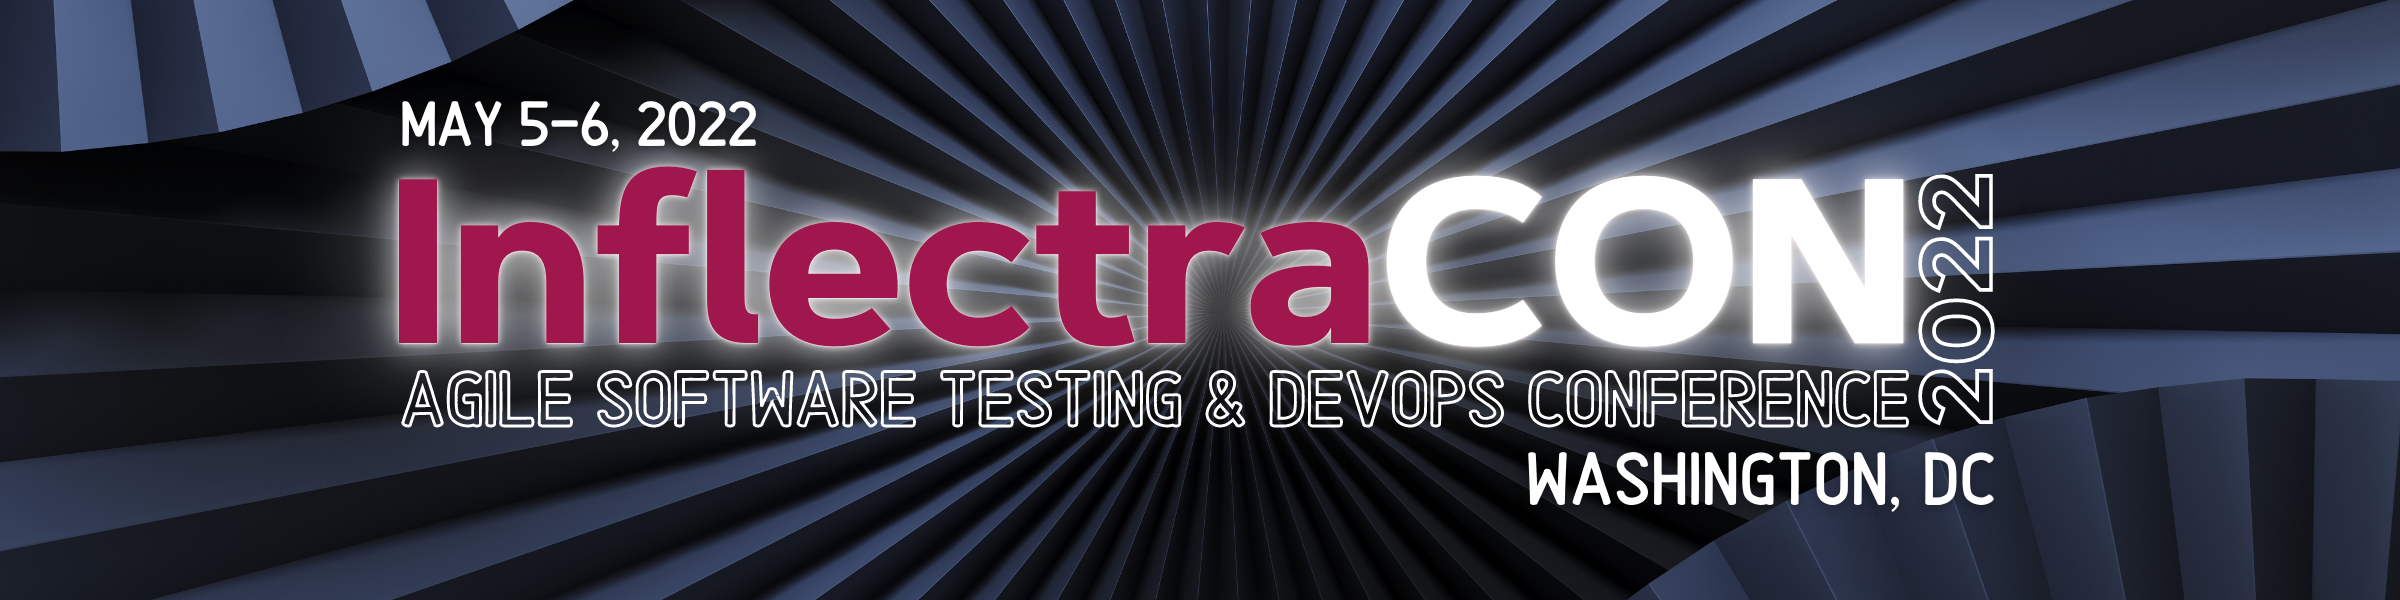 inflectracon-2022-conference-agile-testing-devops-inflectra-image